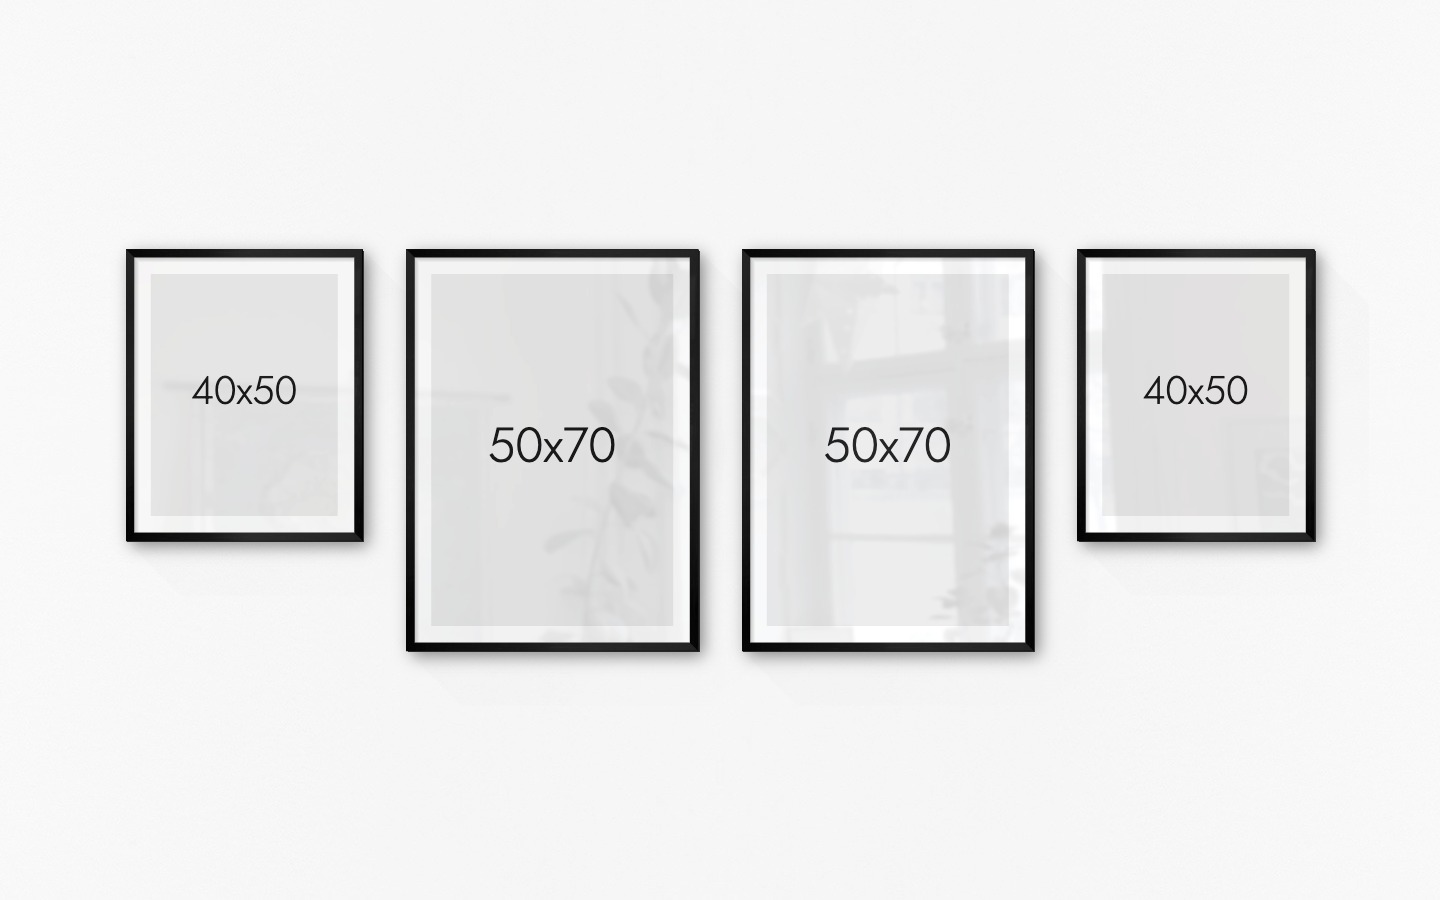 Gallery wall with picture frames in black in sizes 40x50 and 50x70